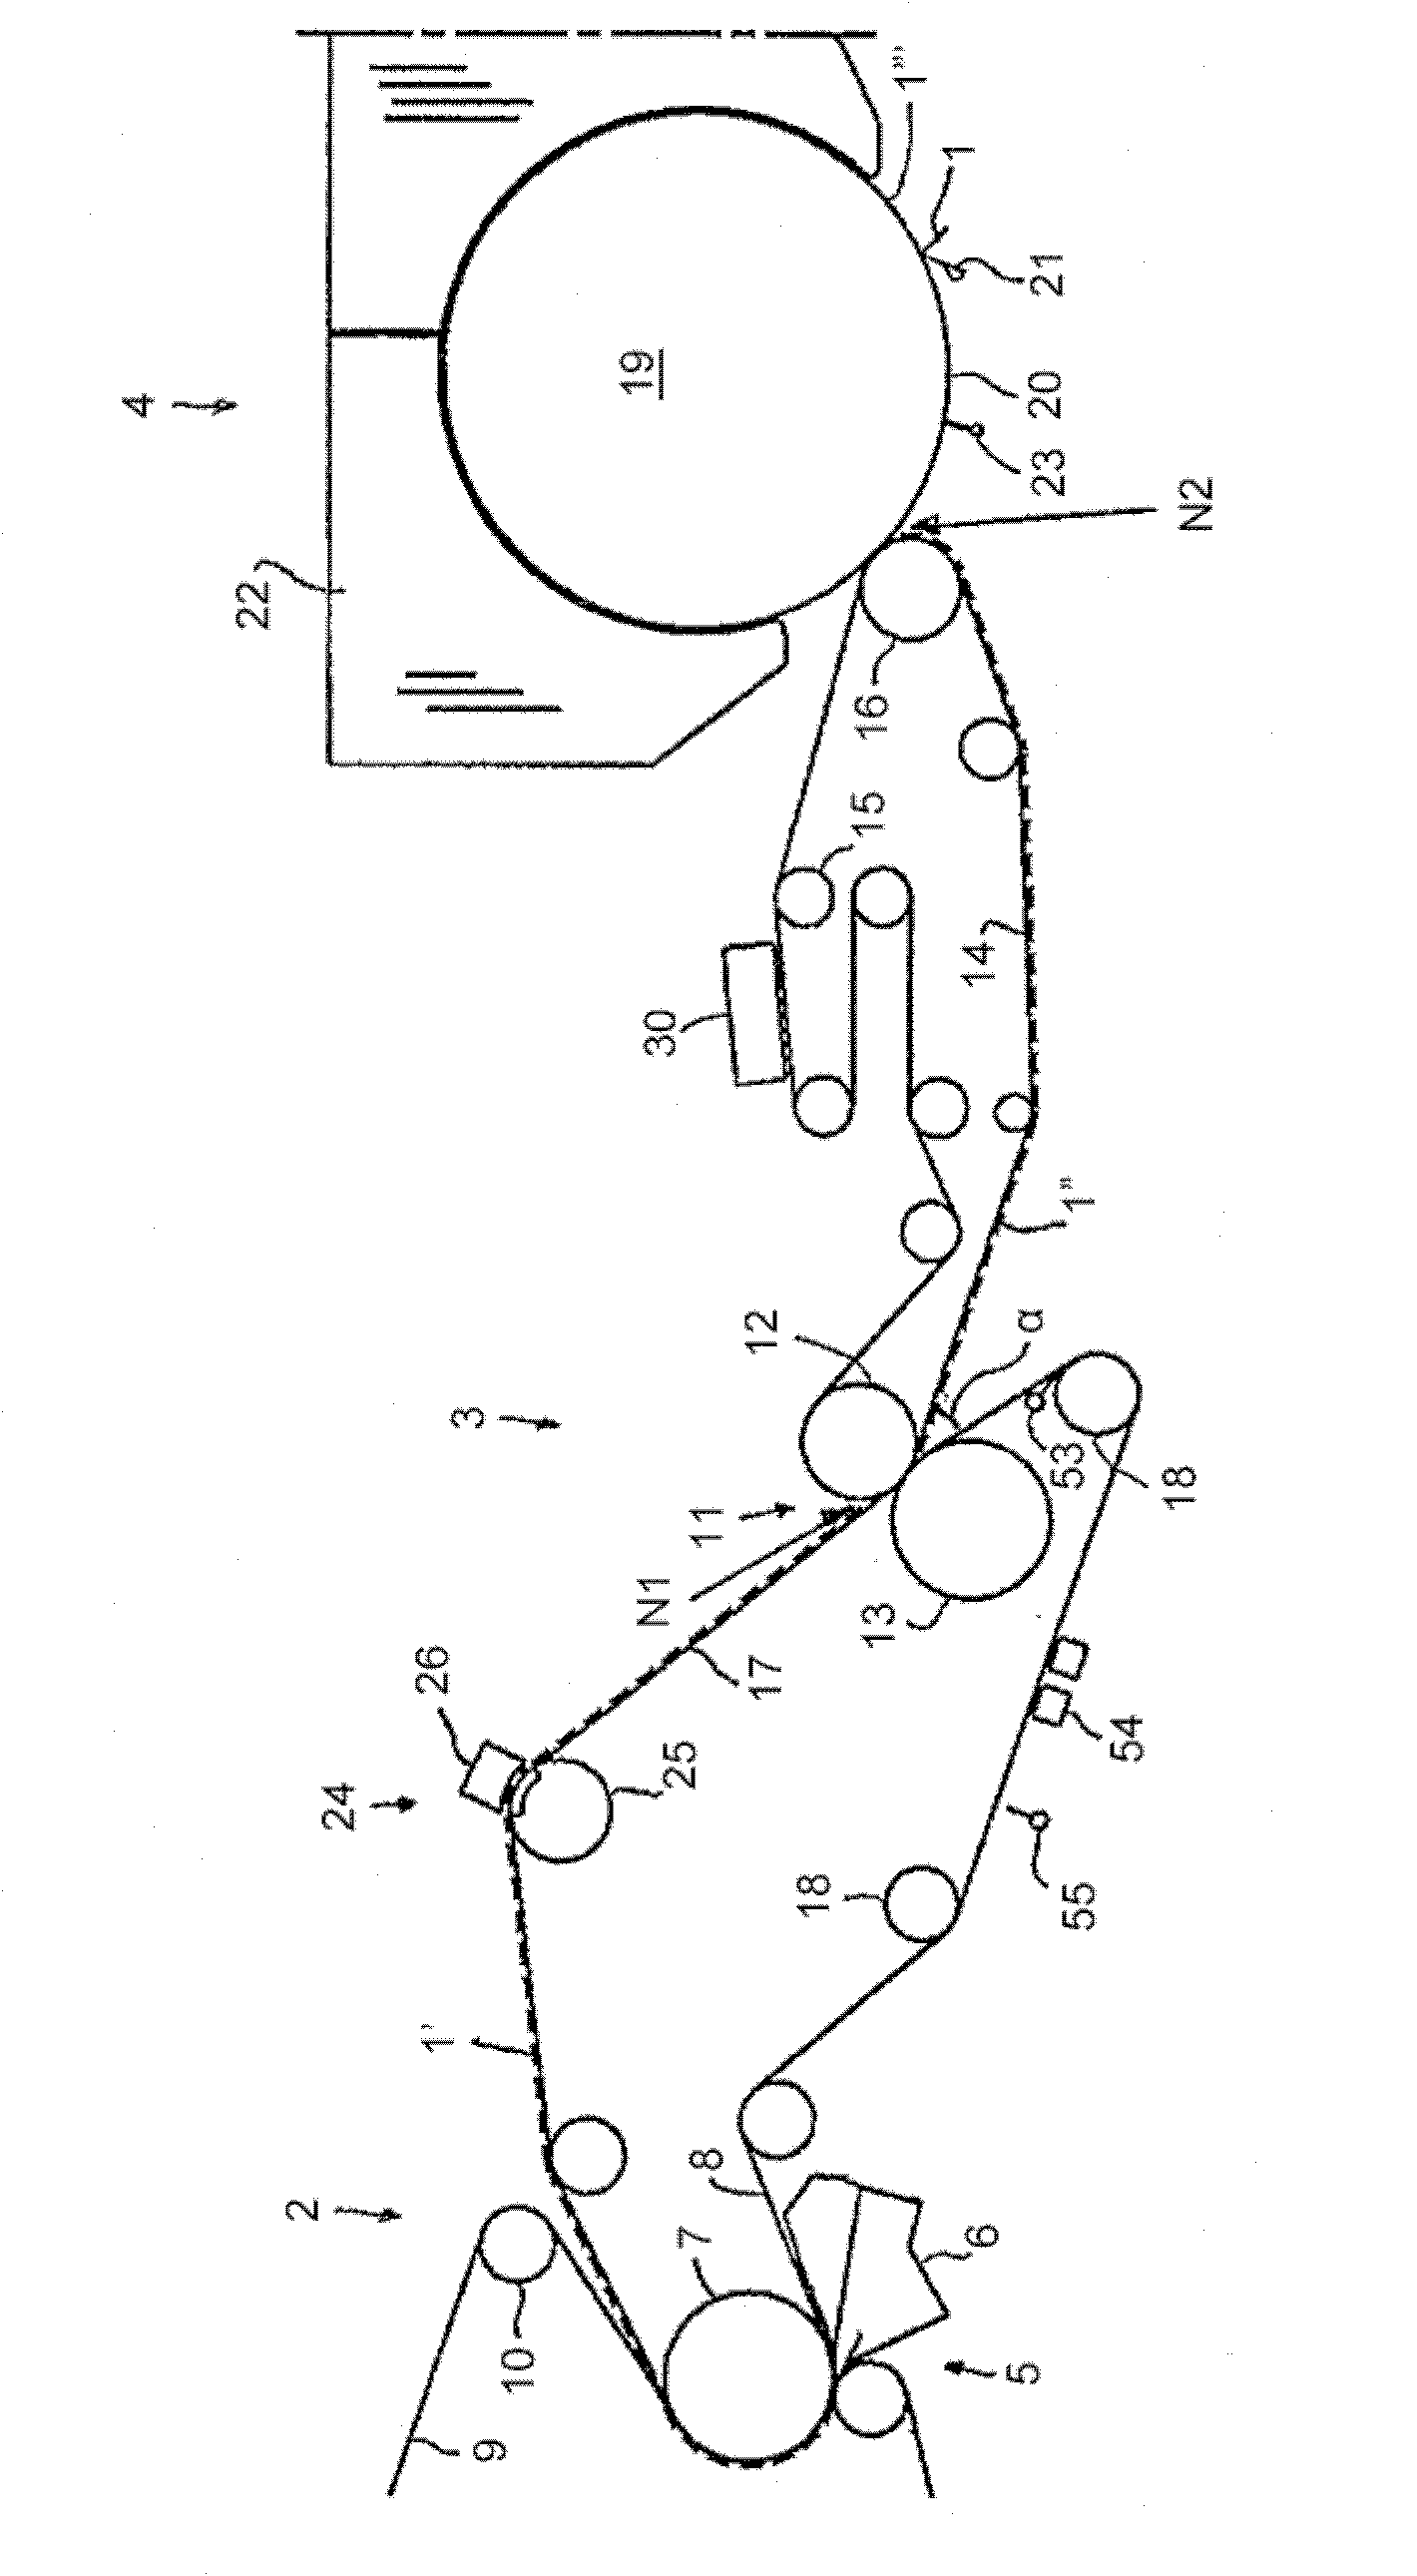 A tissue papermaking machine and a method of manufacturing a tissue paper web